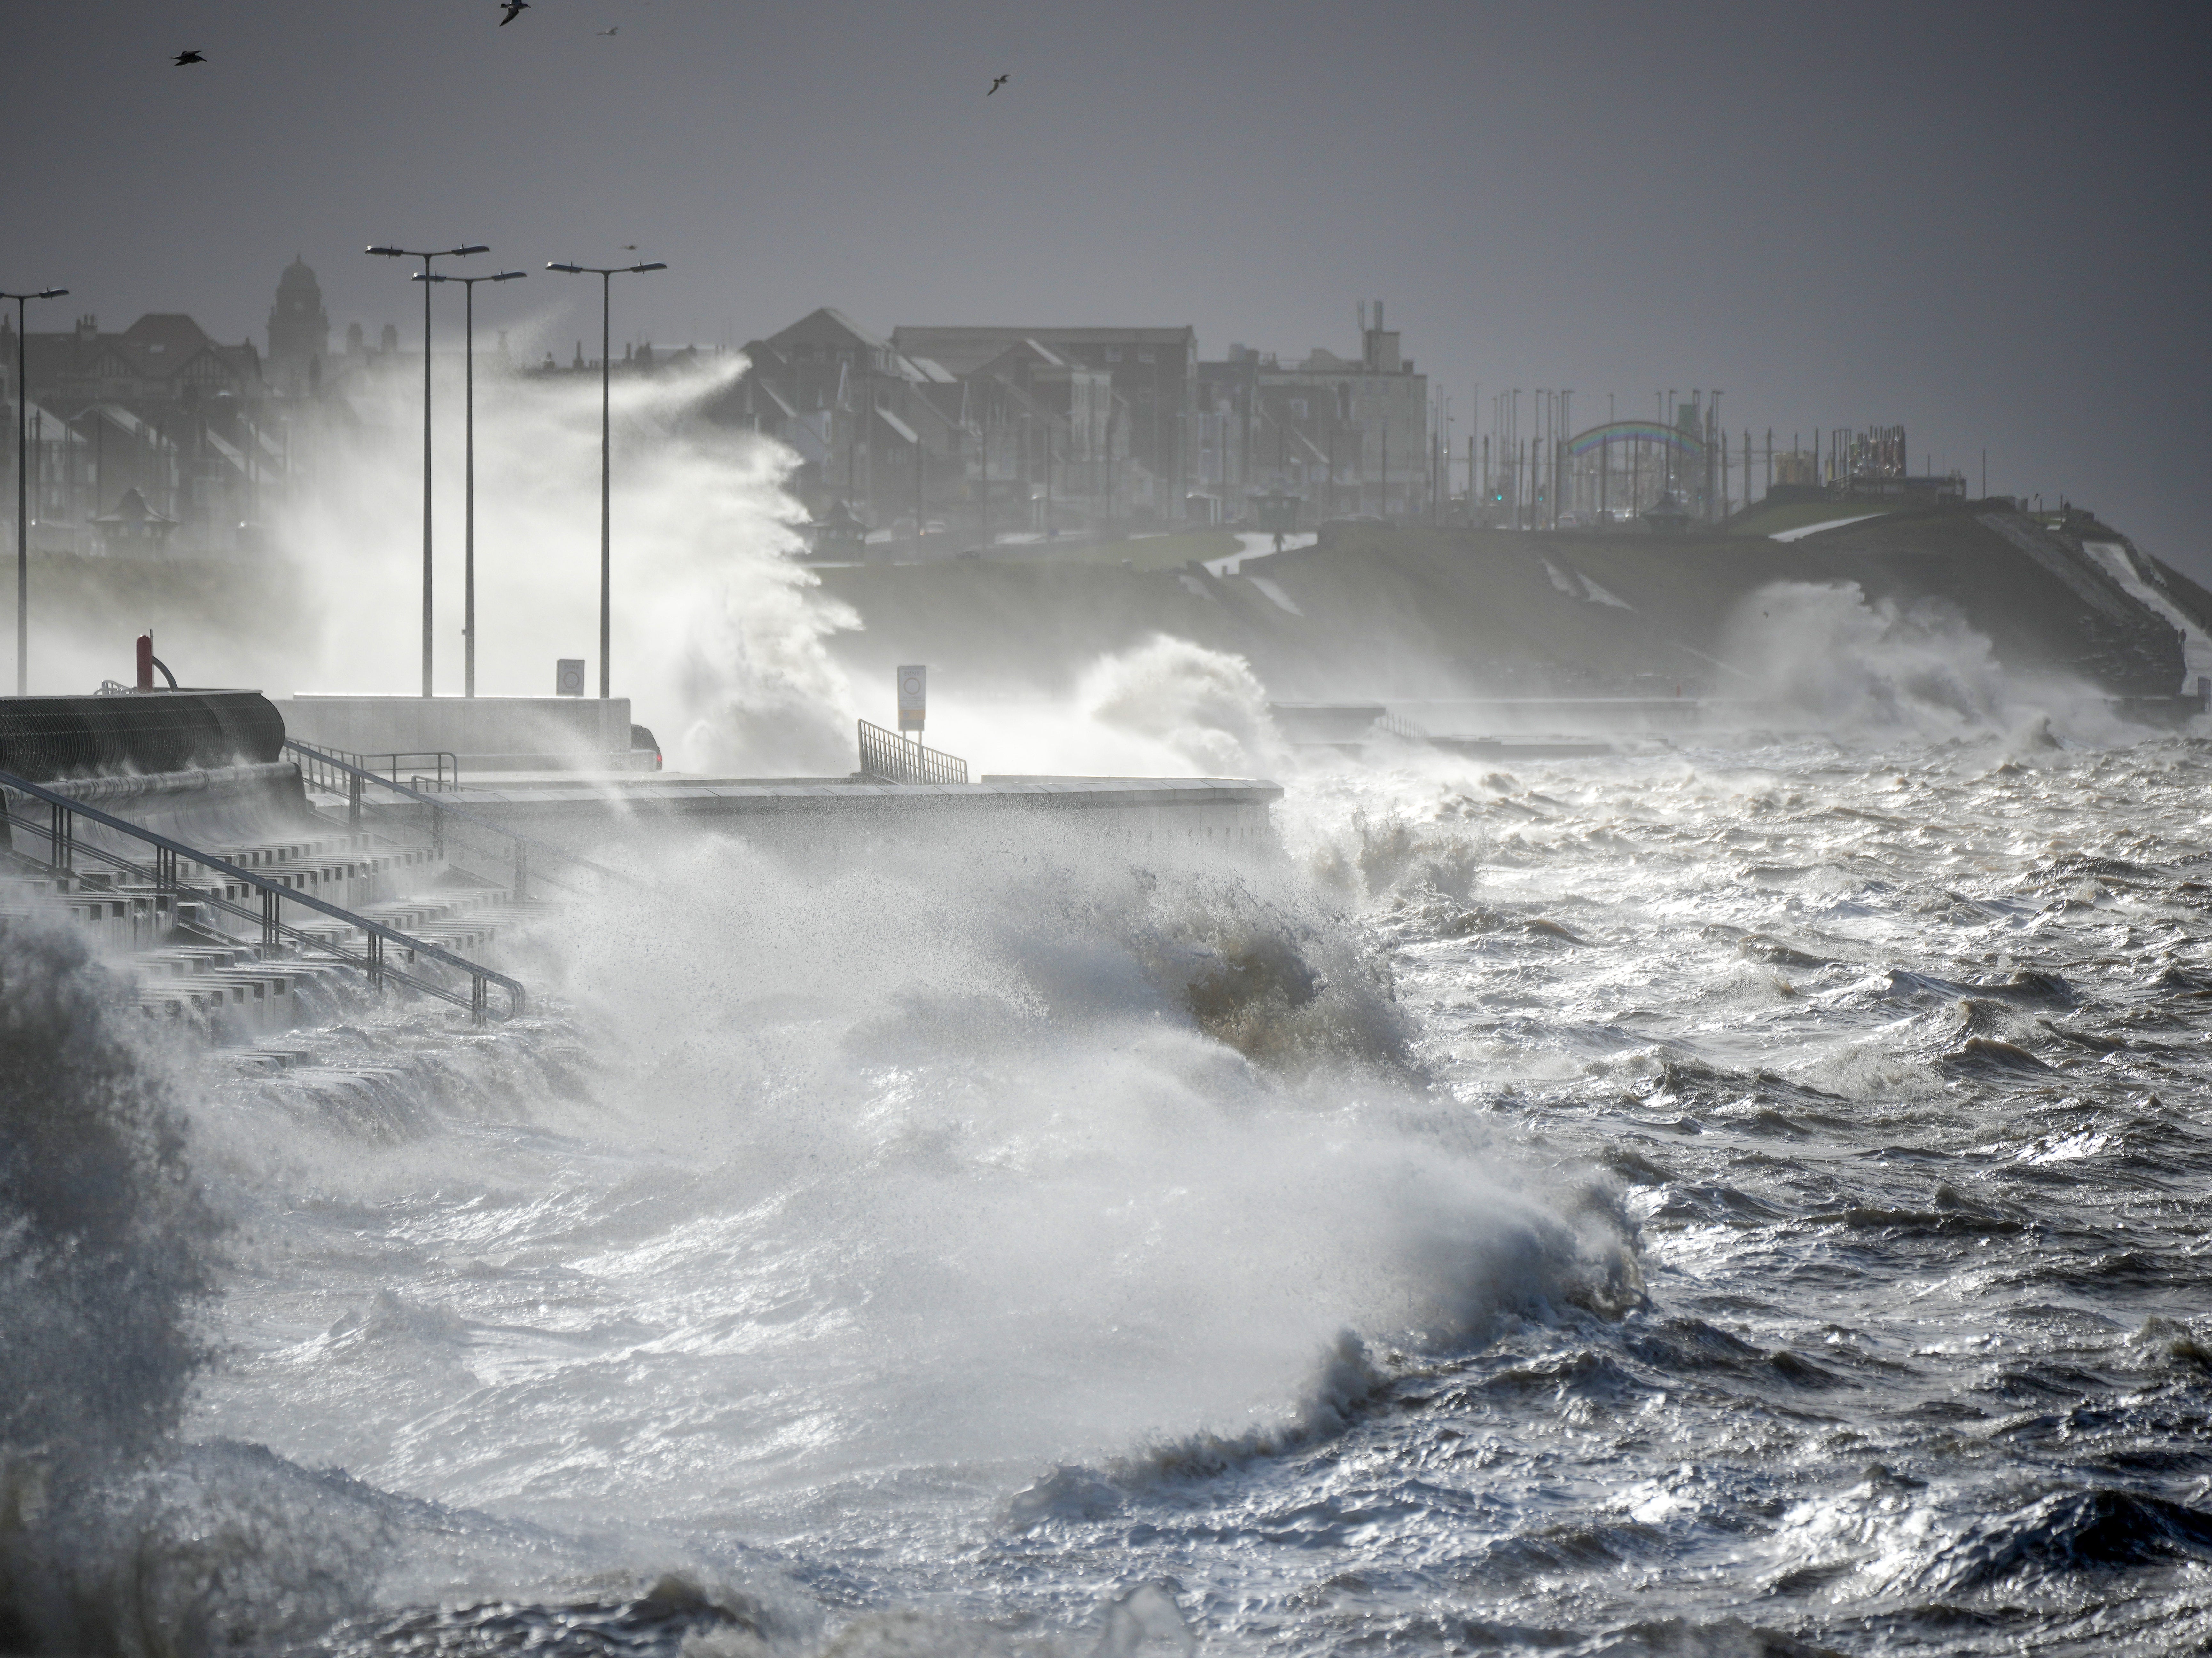 Storm Eunice makes waves in Blackpool